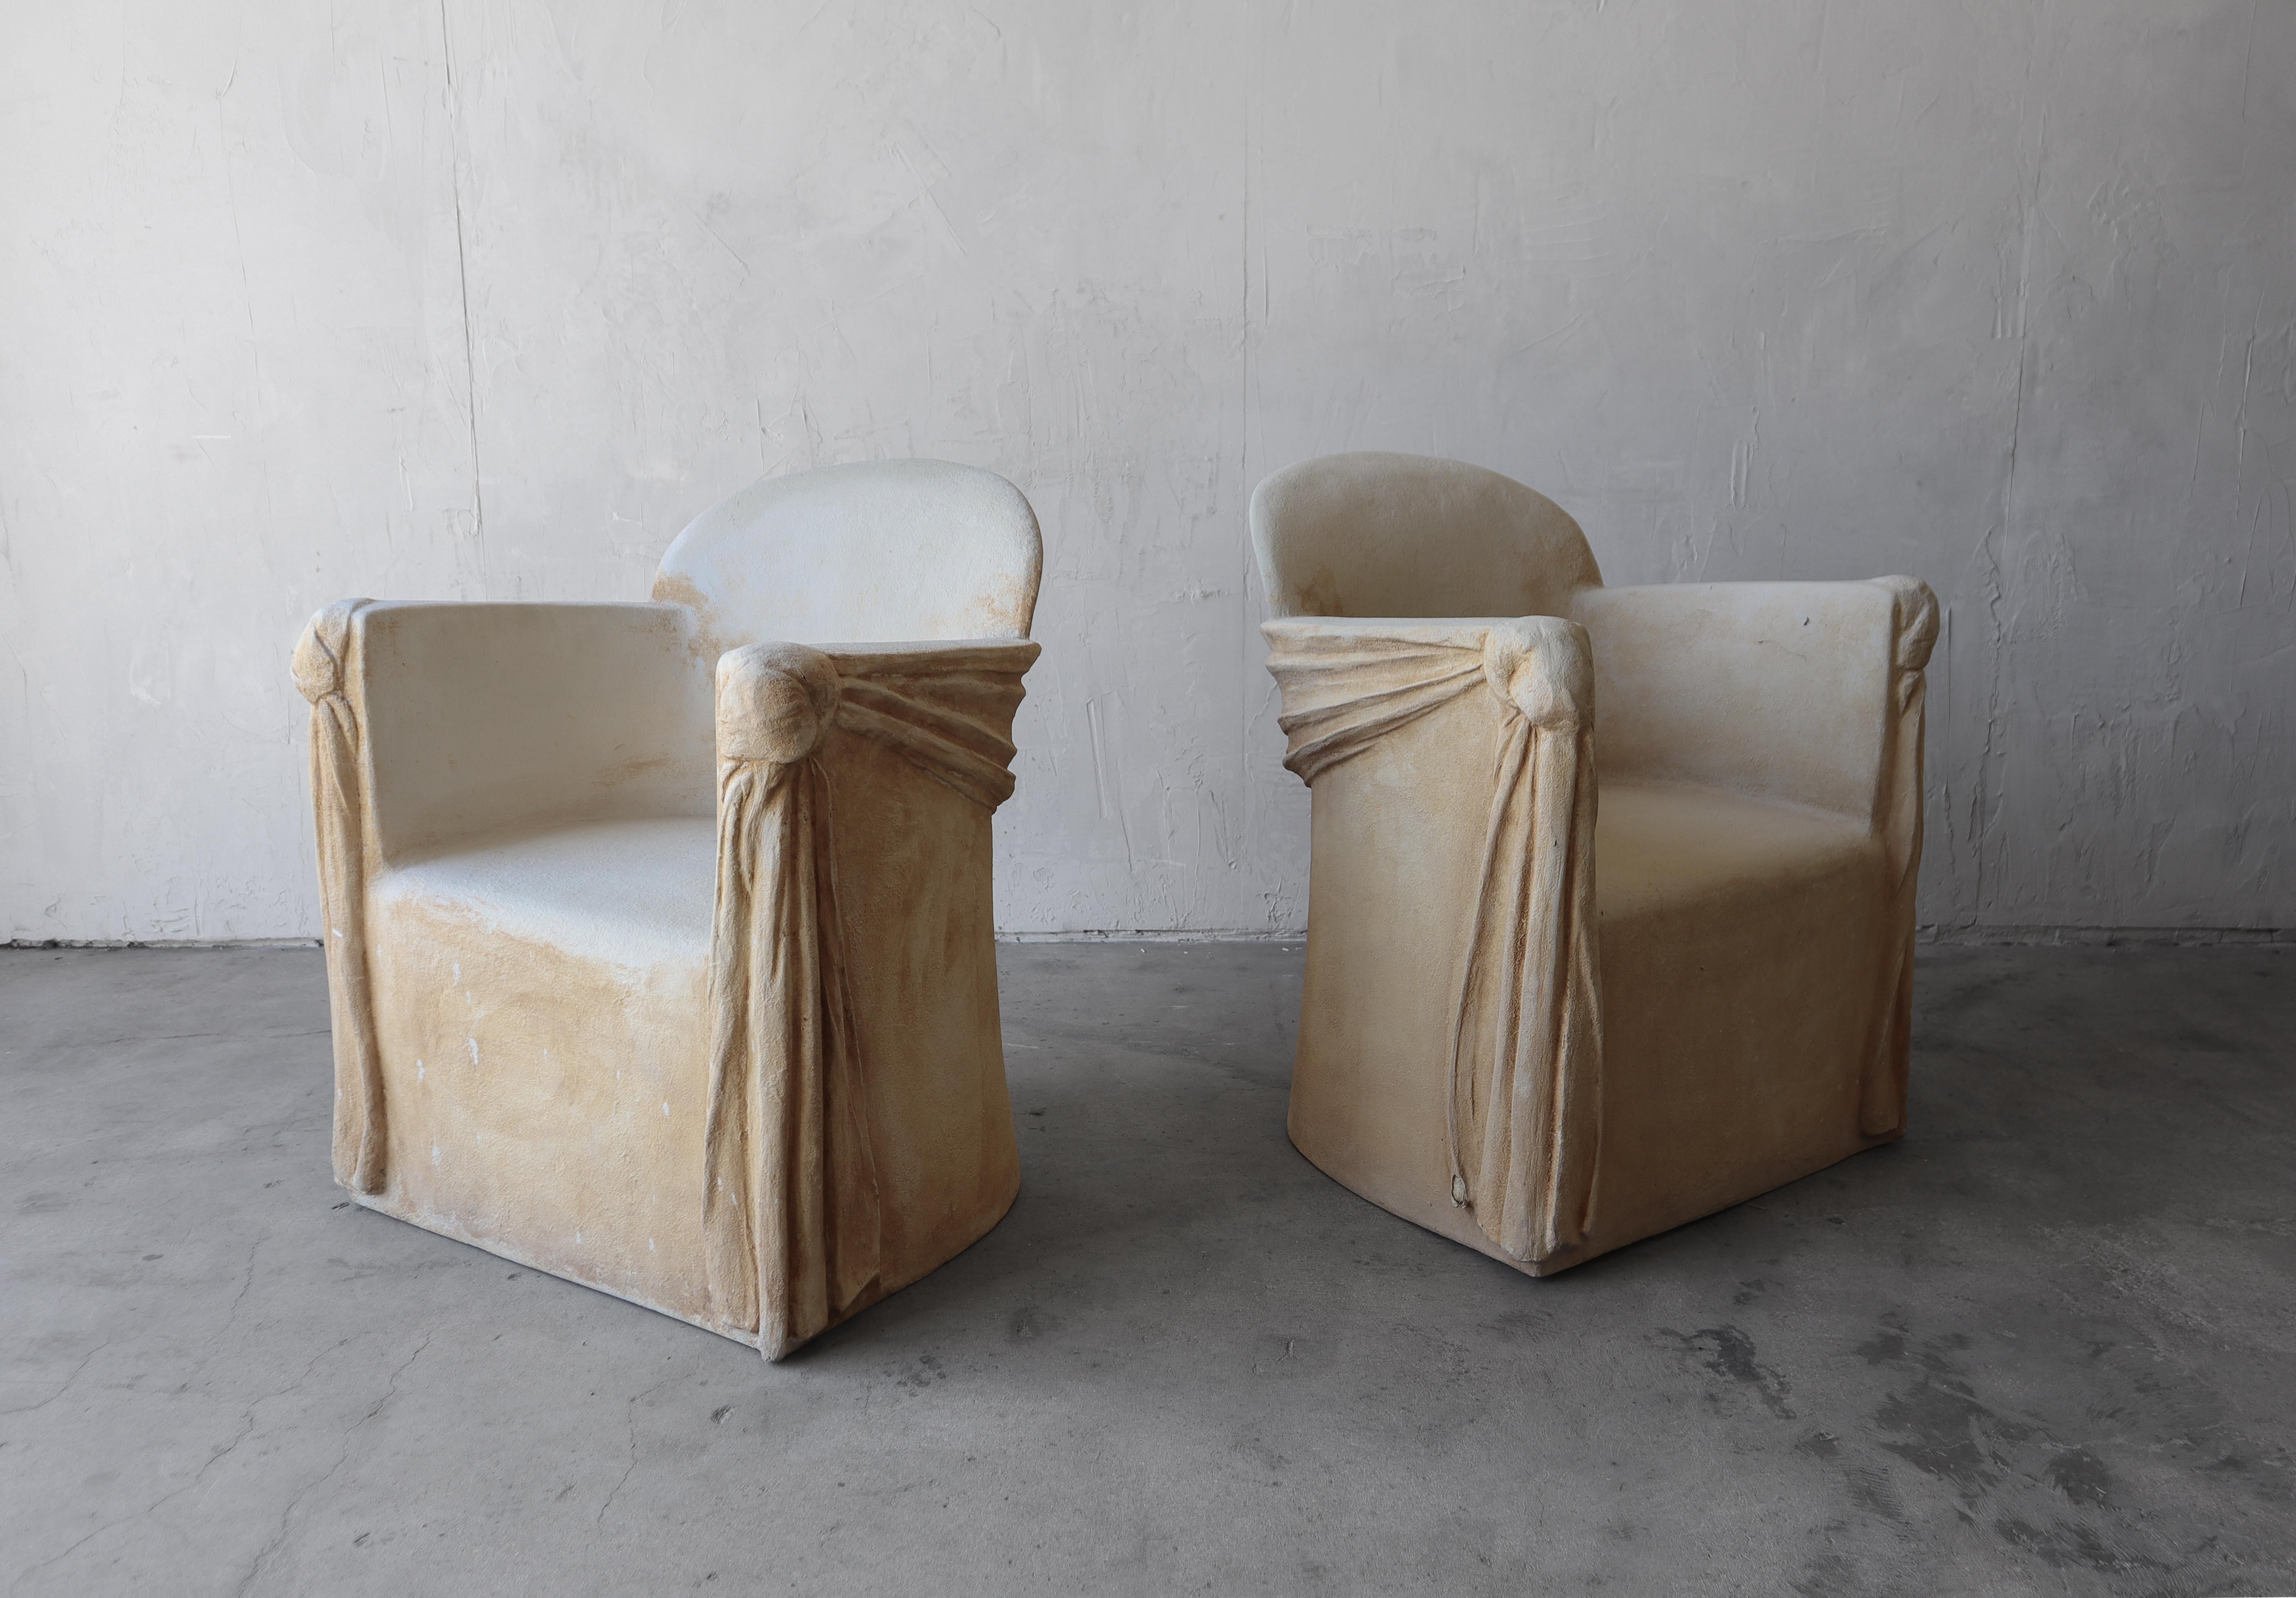 We just love this pair of sculptural pair of Trompe-l'oeil draped plaster and fiberglass chairs. They have been finished to look like stone. They achieve a very unique and artistic look. They have lots of depth and texture. They are the perfect